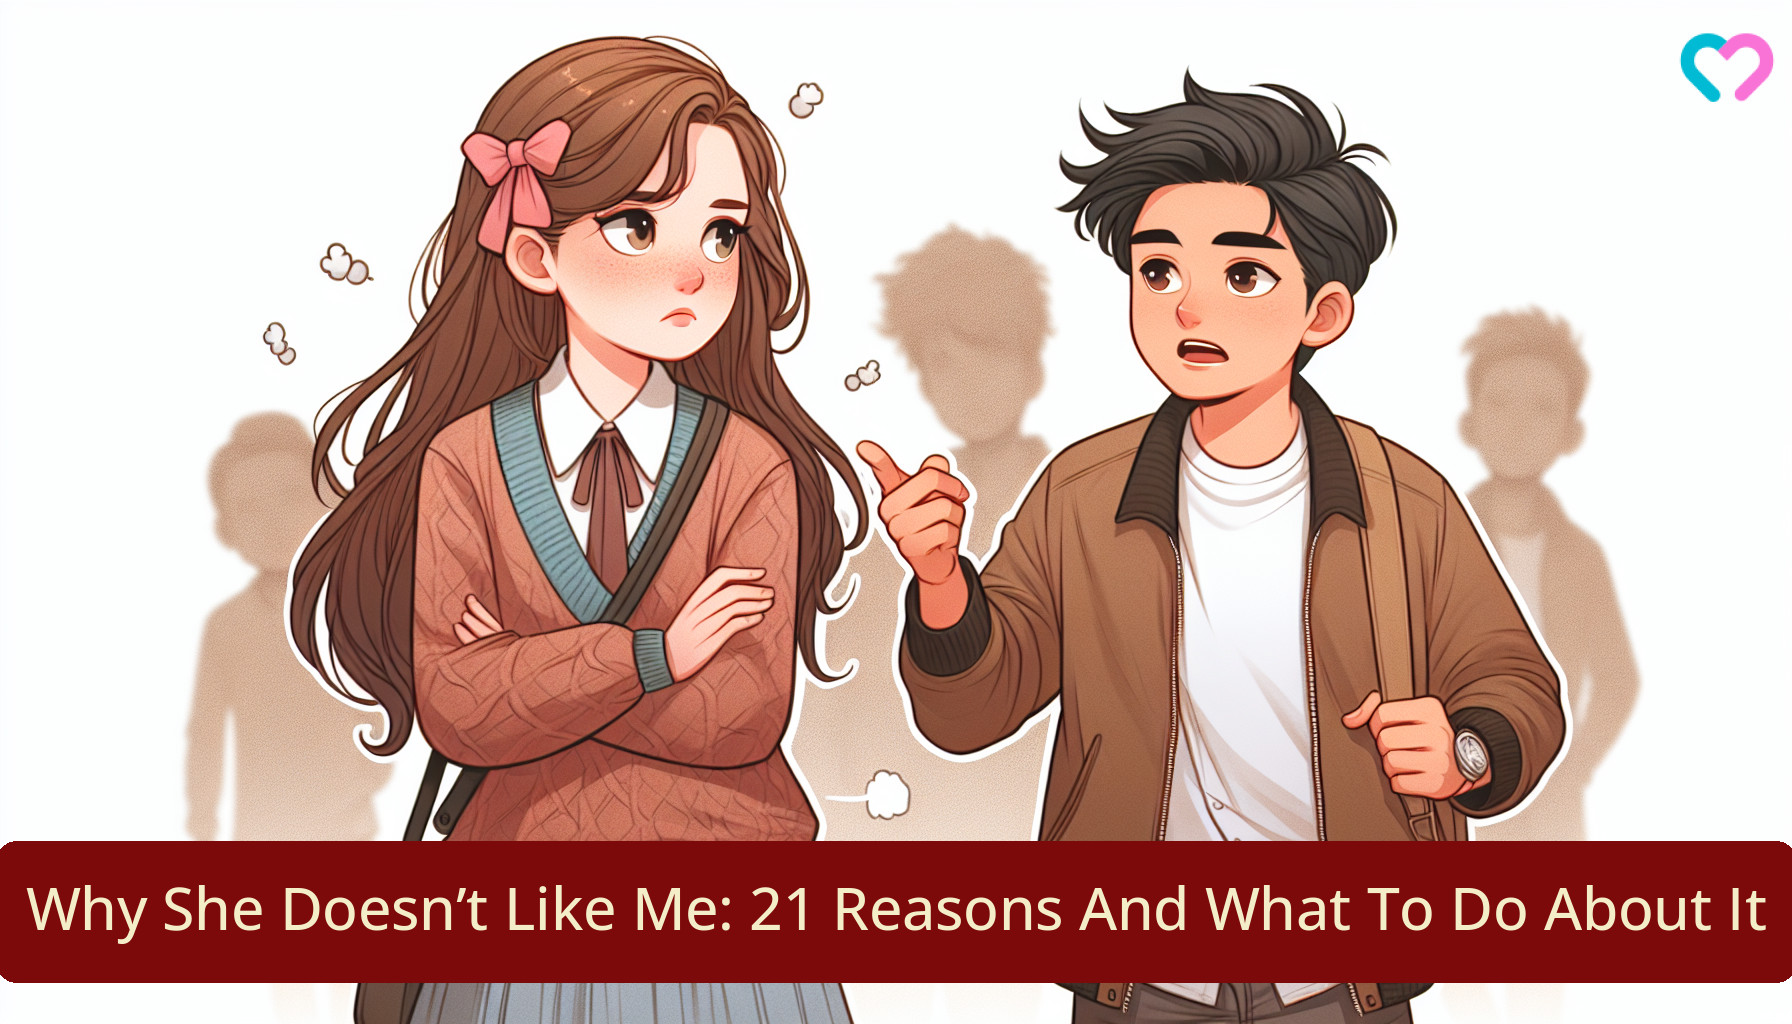 why doesn't she like me_illustration